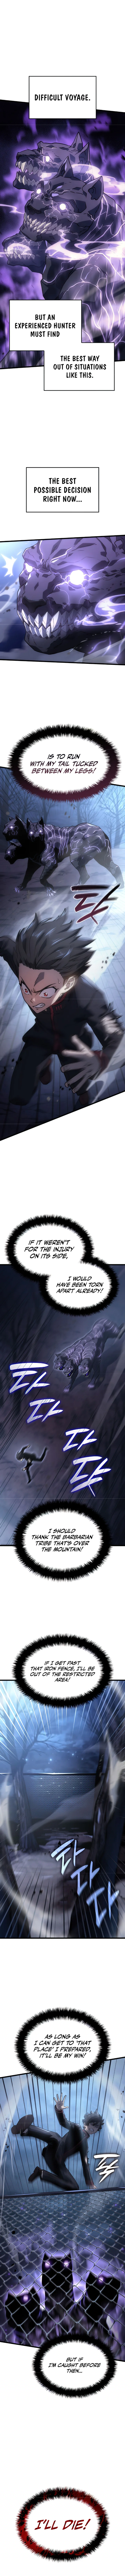 Revenge of the Iron-Blooded Sword Hound - Chapter 6 Page 4